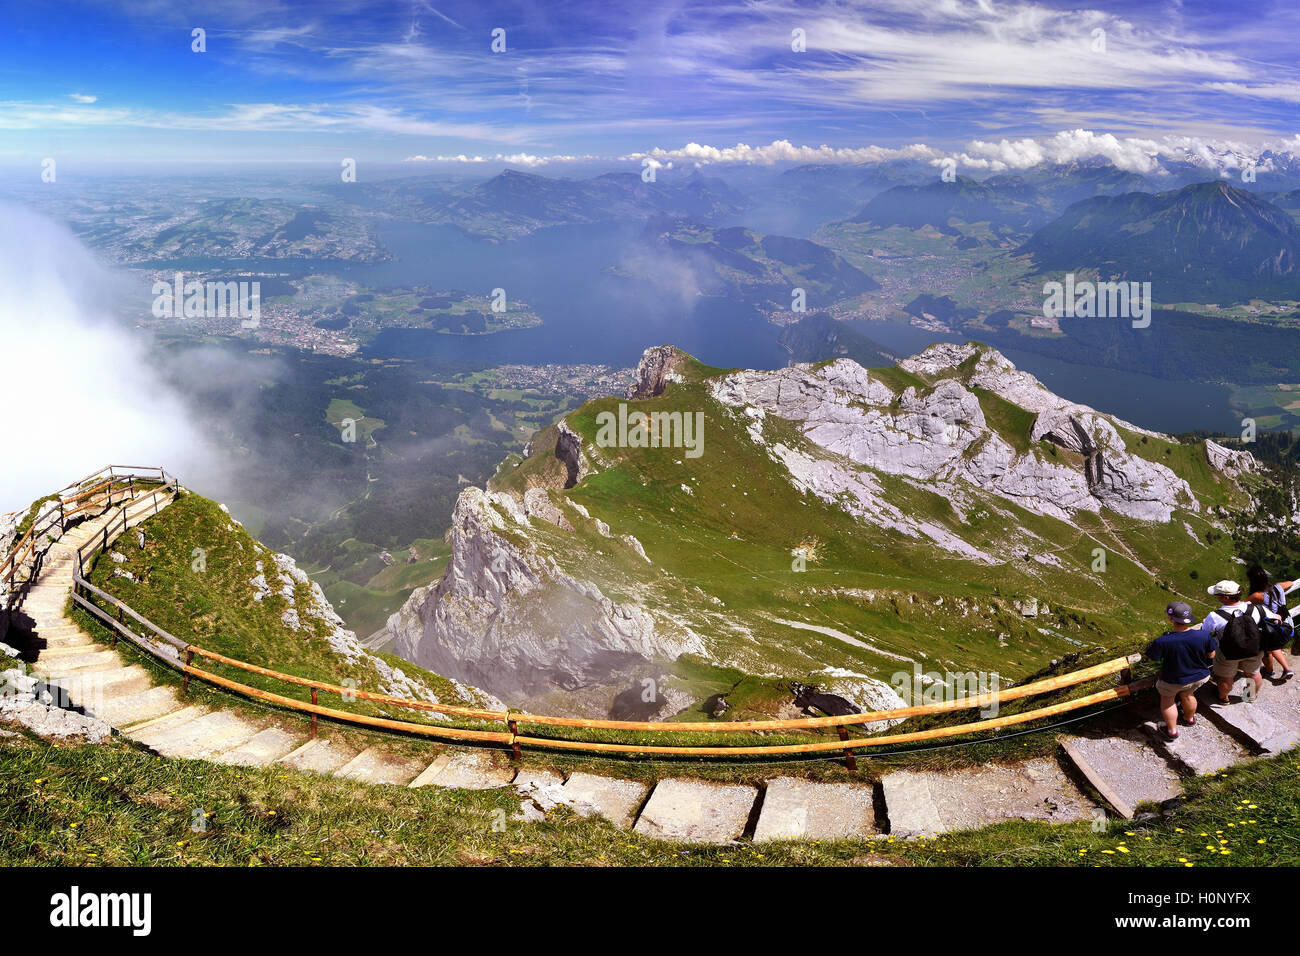 View from Pilatus mountain to Lake Lucerne and Central Swiss Alps, boundary region Nidwalden Obwalden and Lucerne, Switzerland Stock Photo